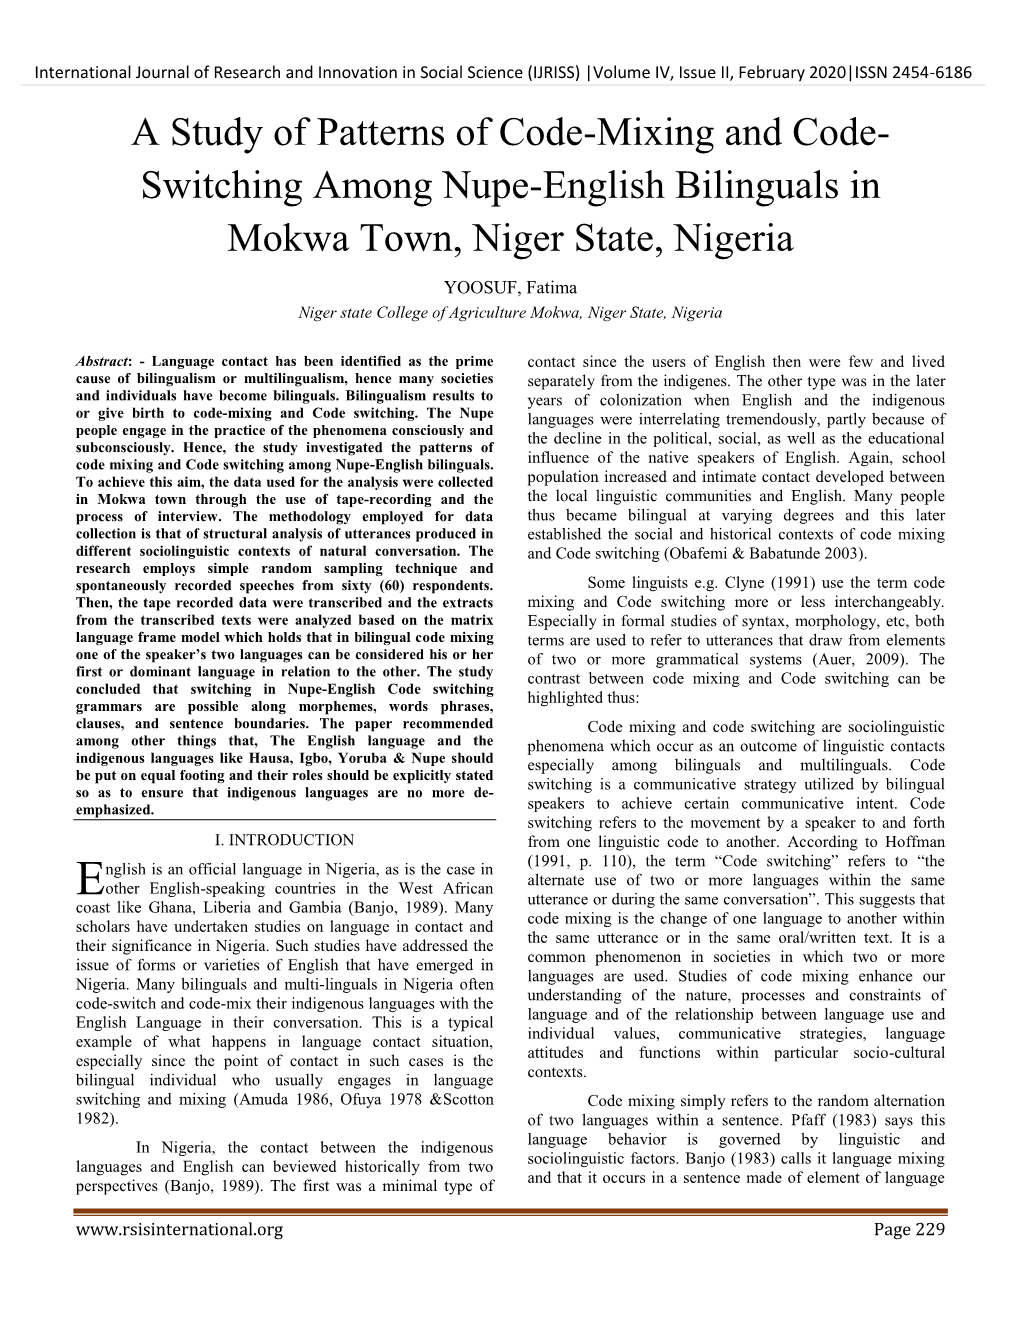 A Study of Patterns of Code-Mixing and Code-Switching Among Nupe